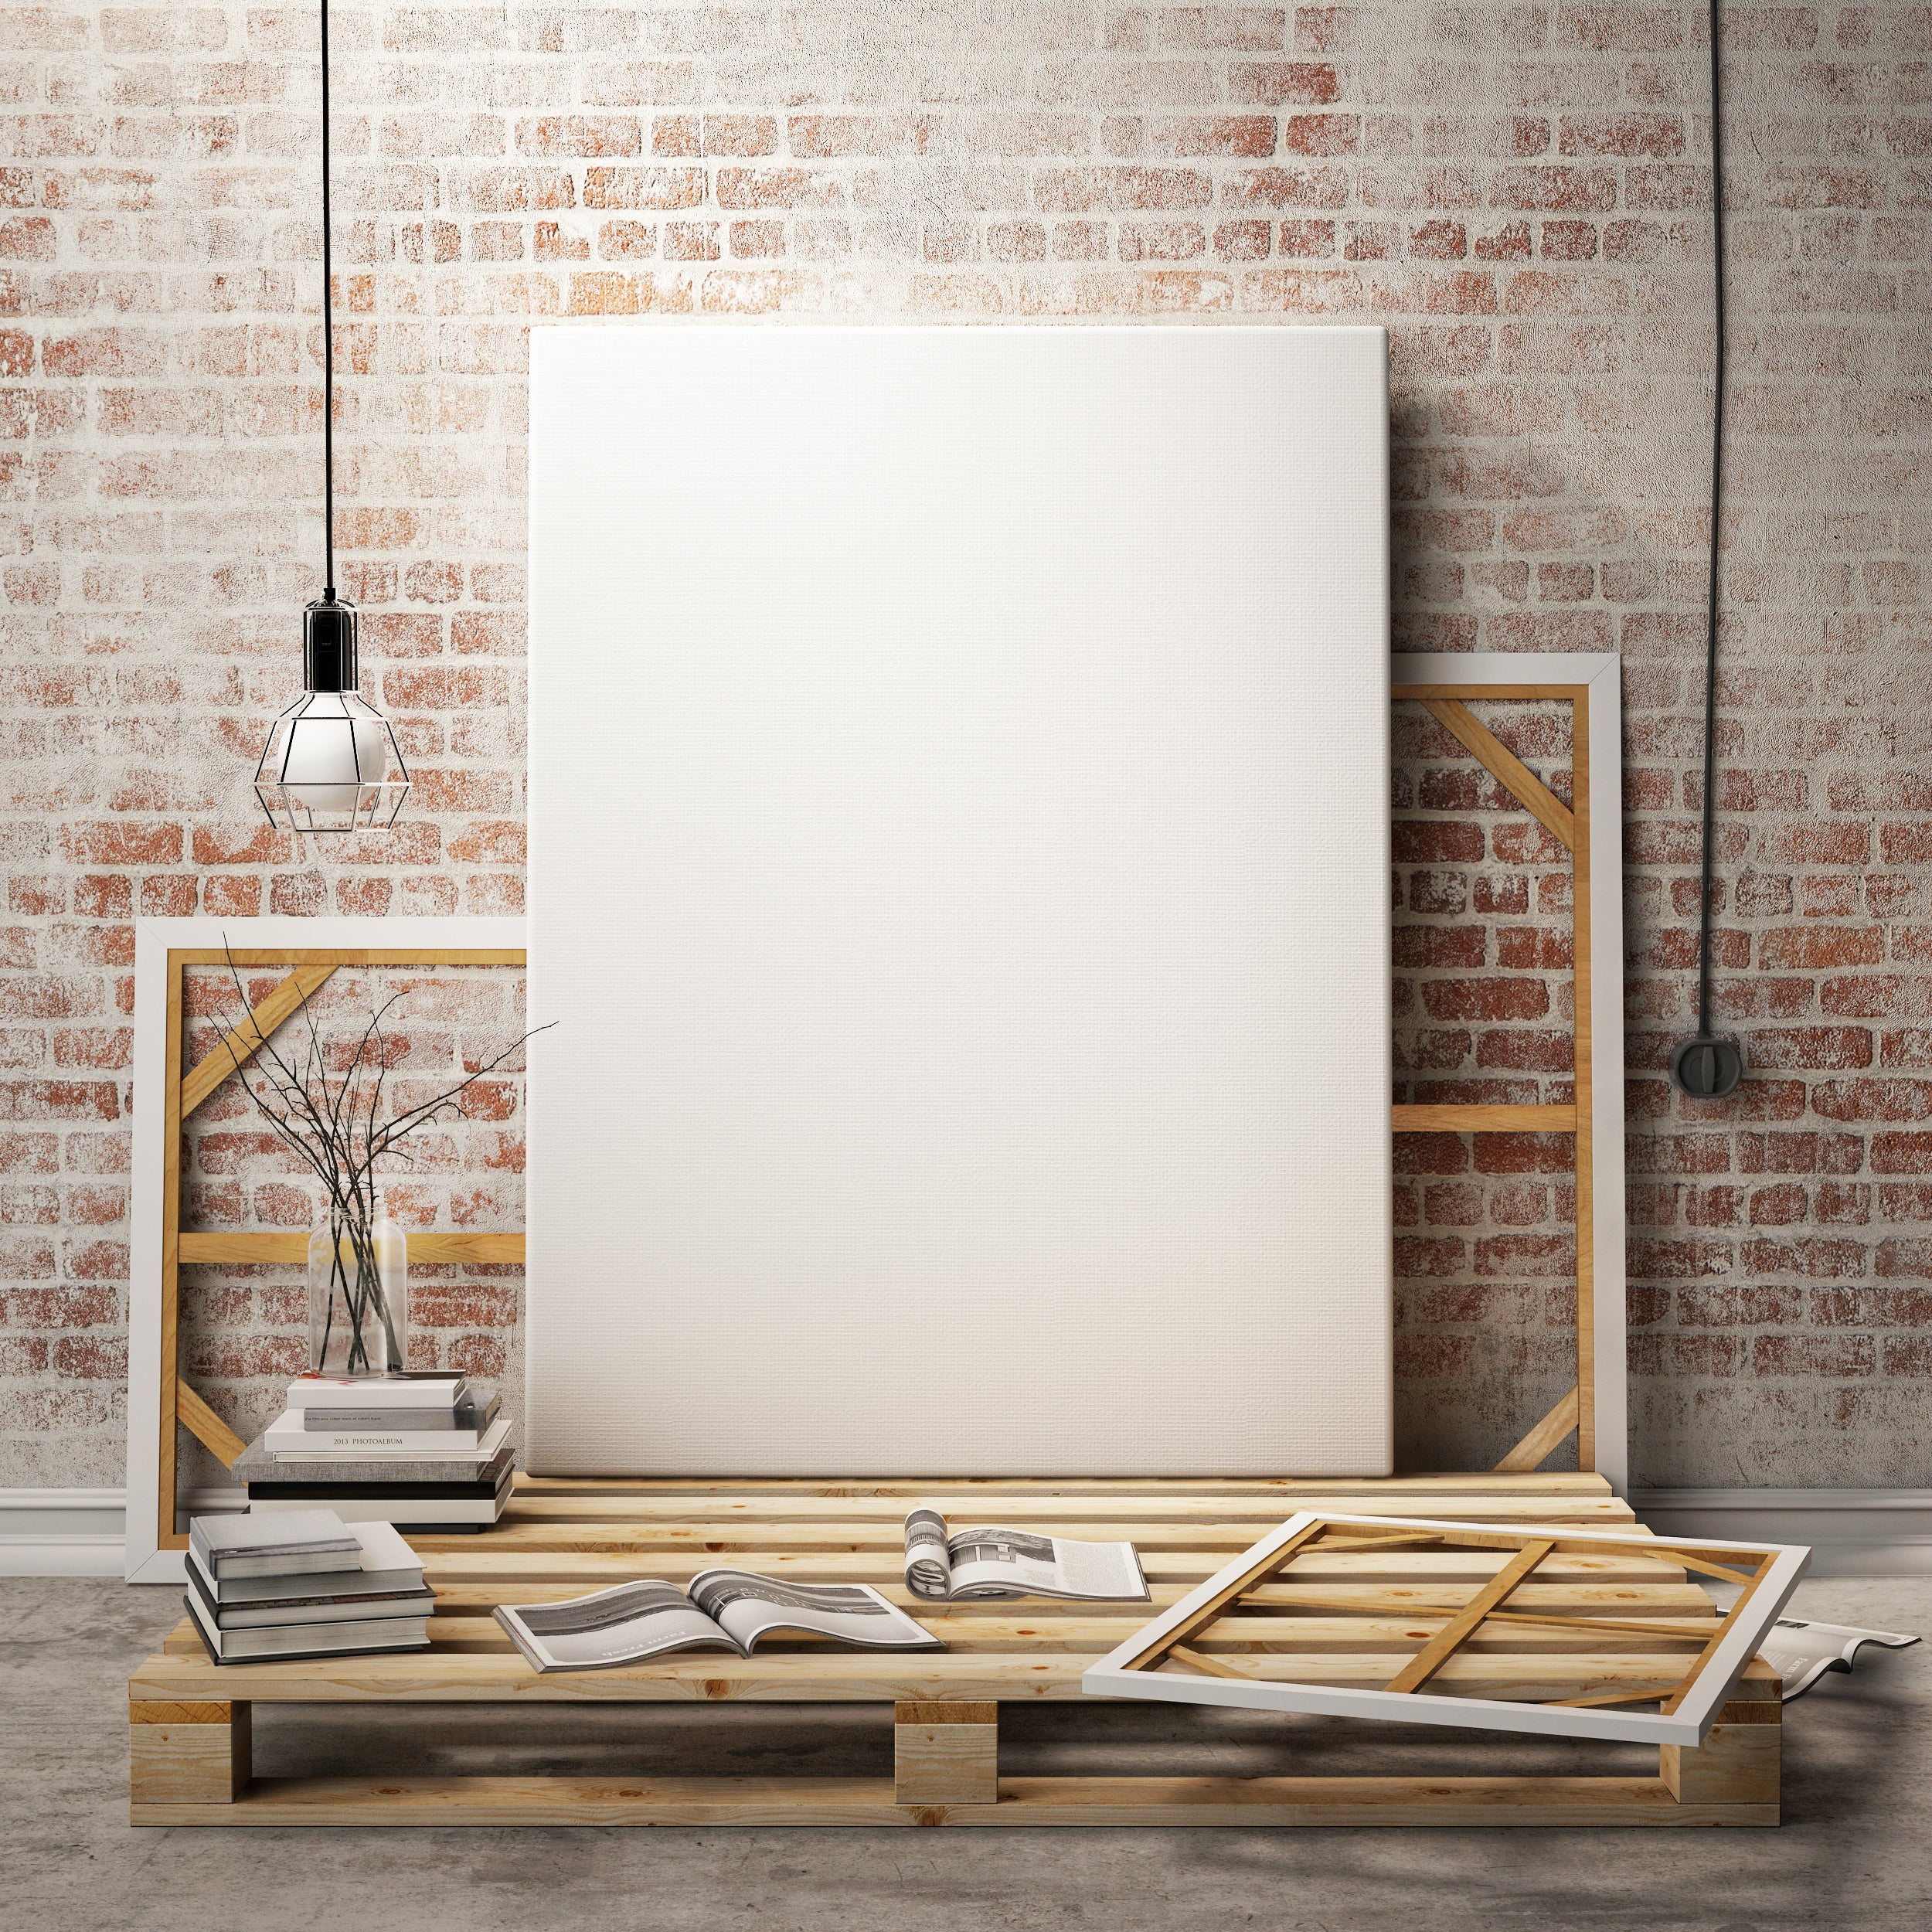 Canvas Size Guide - How to Bring Perfect Artworks to Your Home?